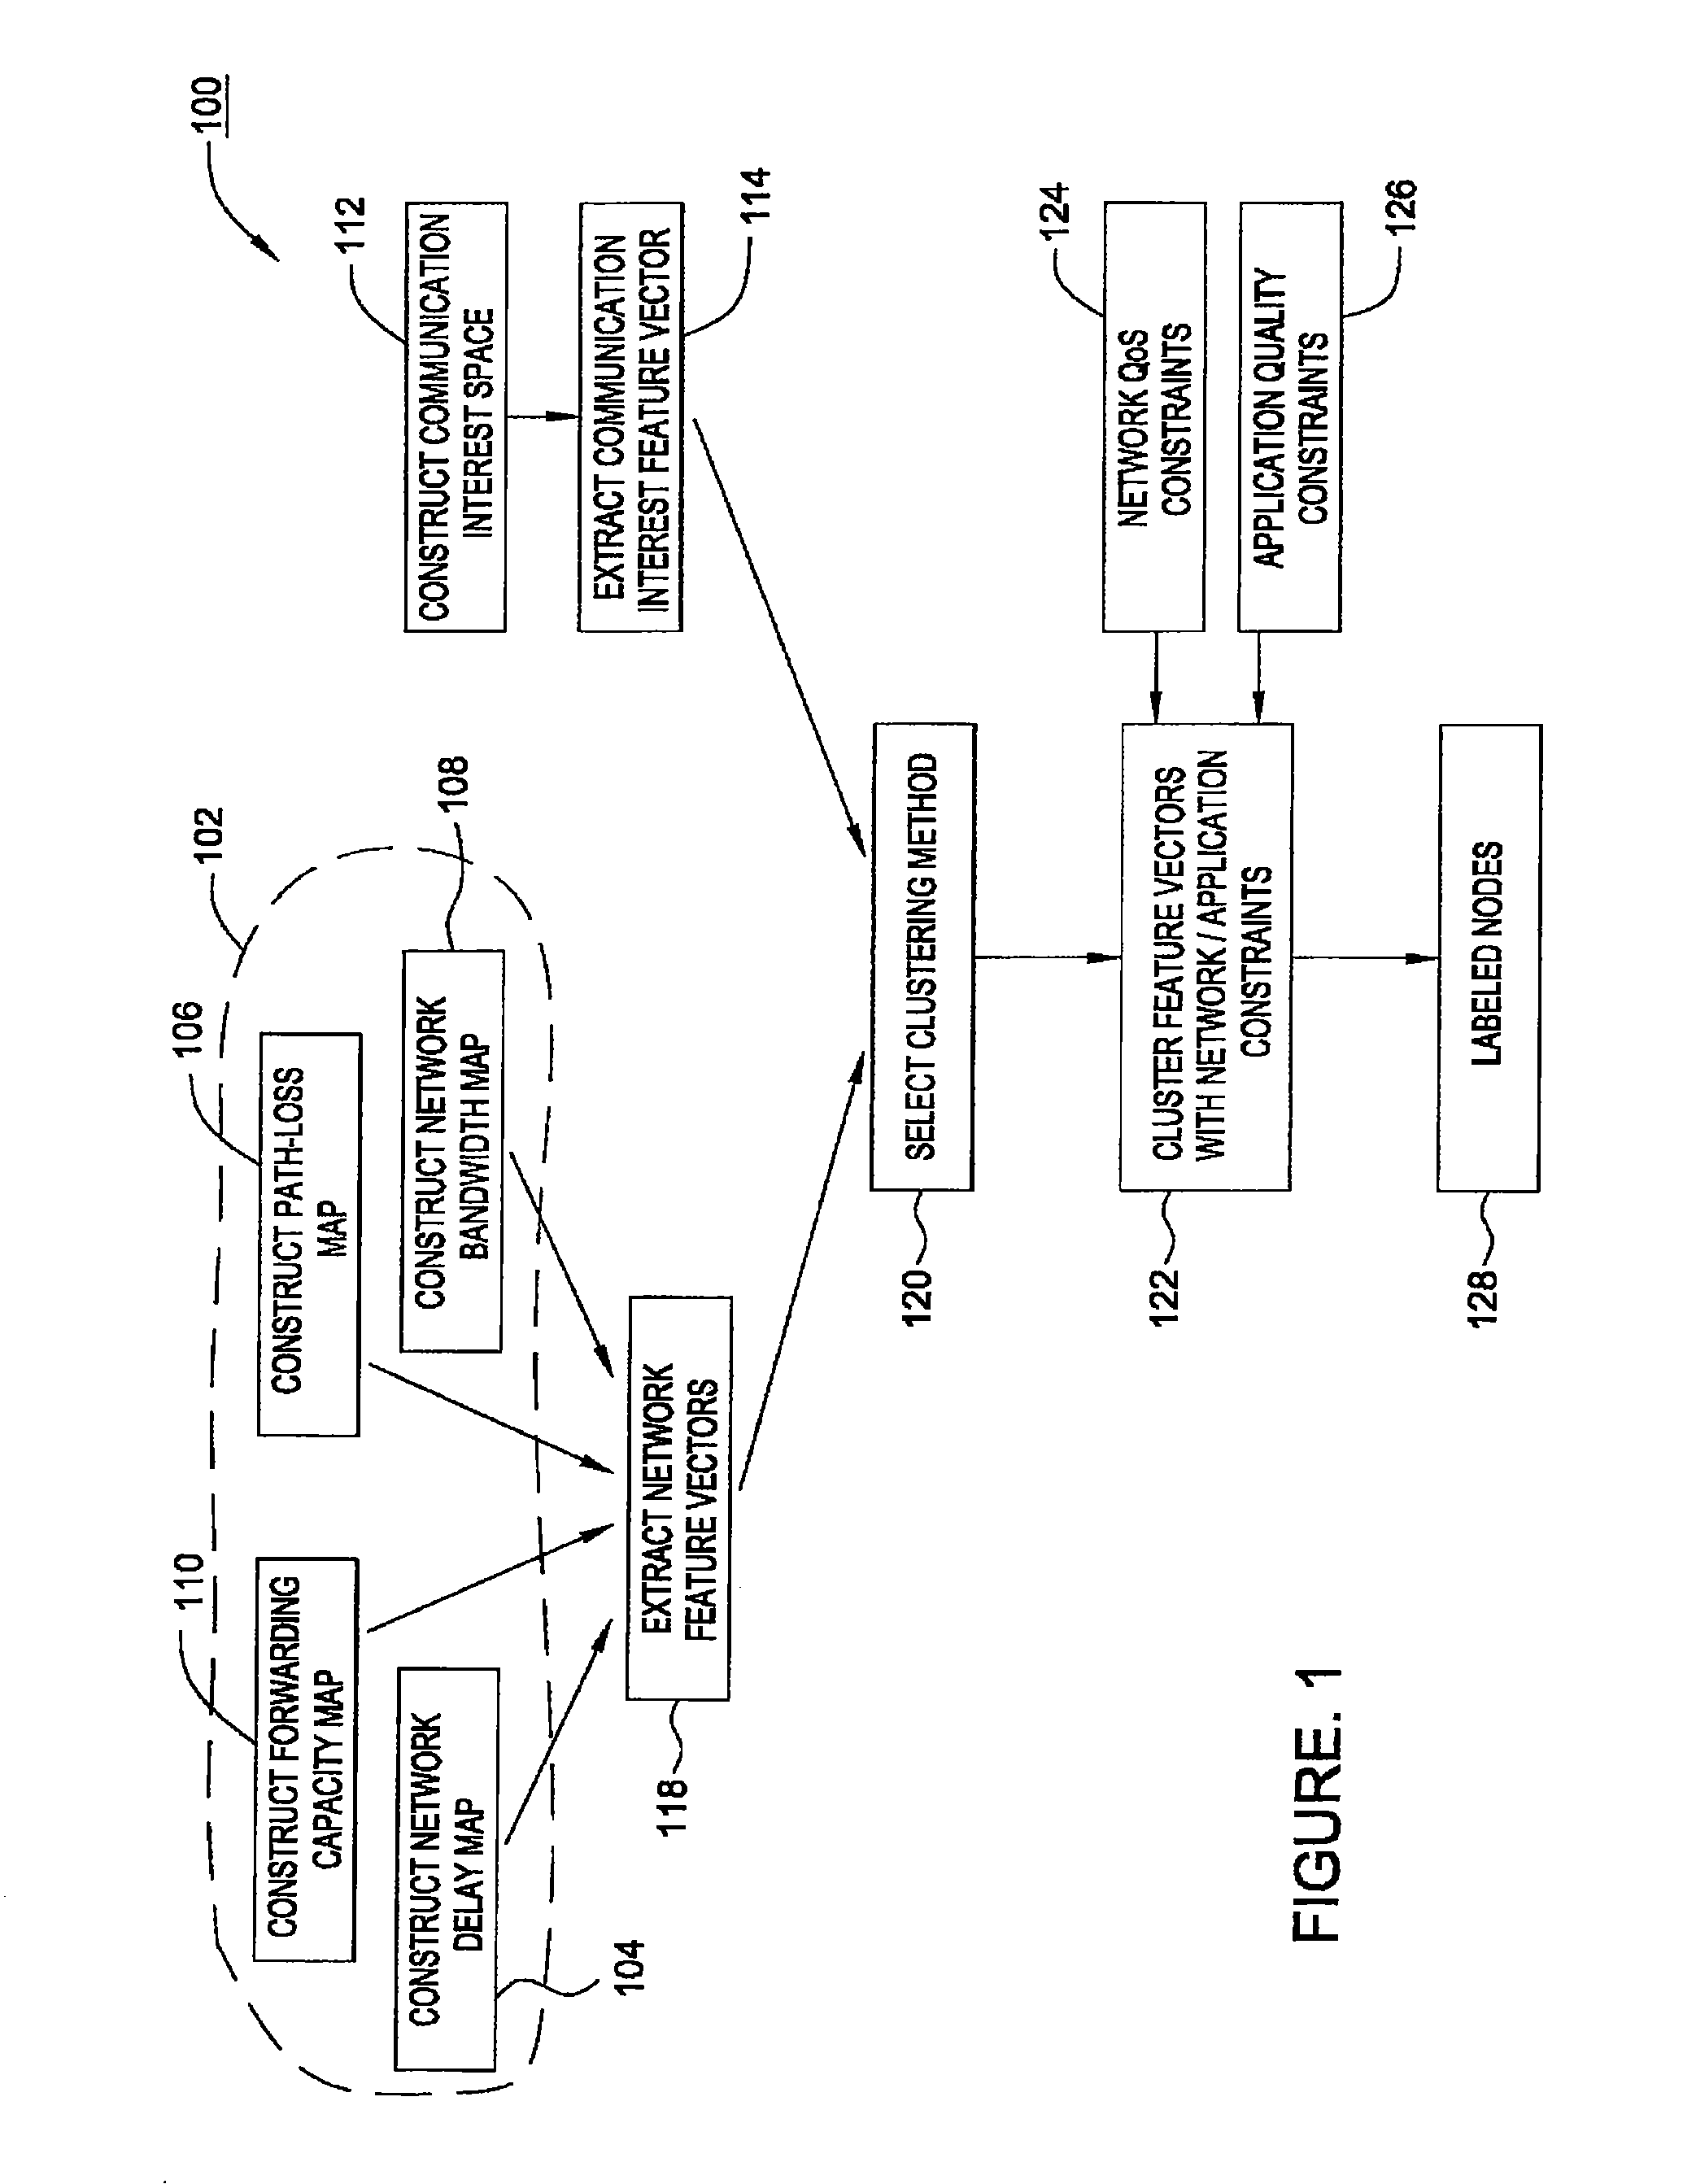 Method and apparatus to support application and network awareness of collaborative applications using multi-attribute clustering